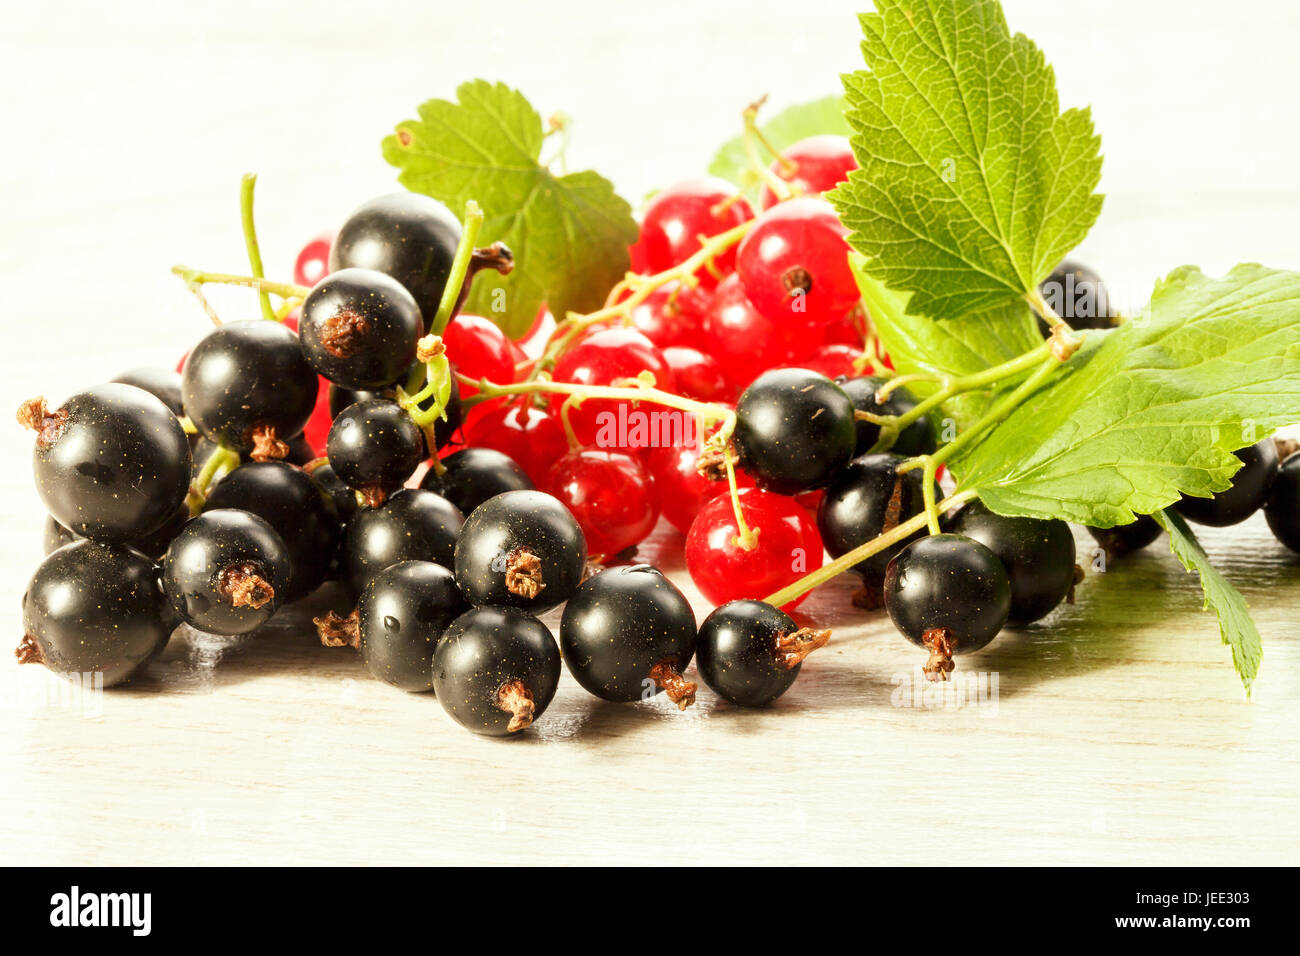 Black and red currant on a light background, close-up Stock Photo